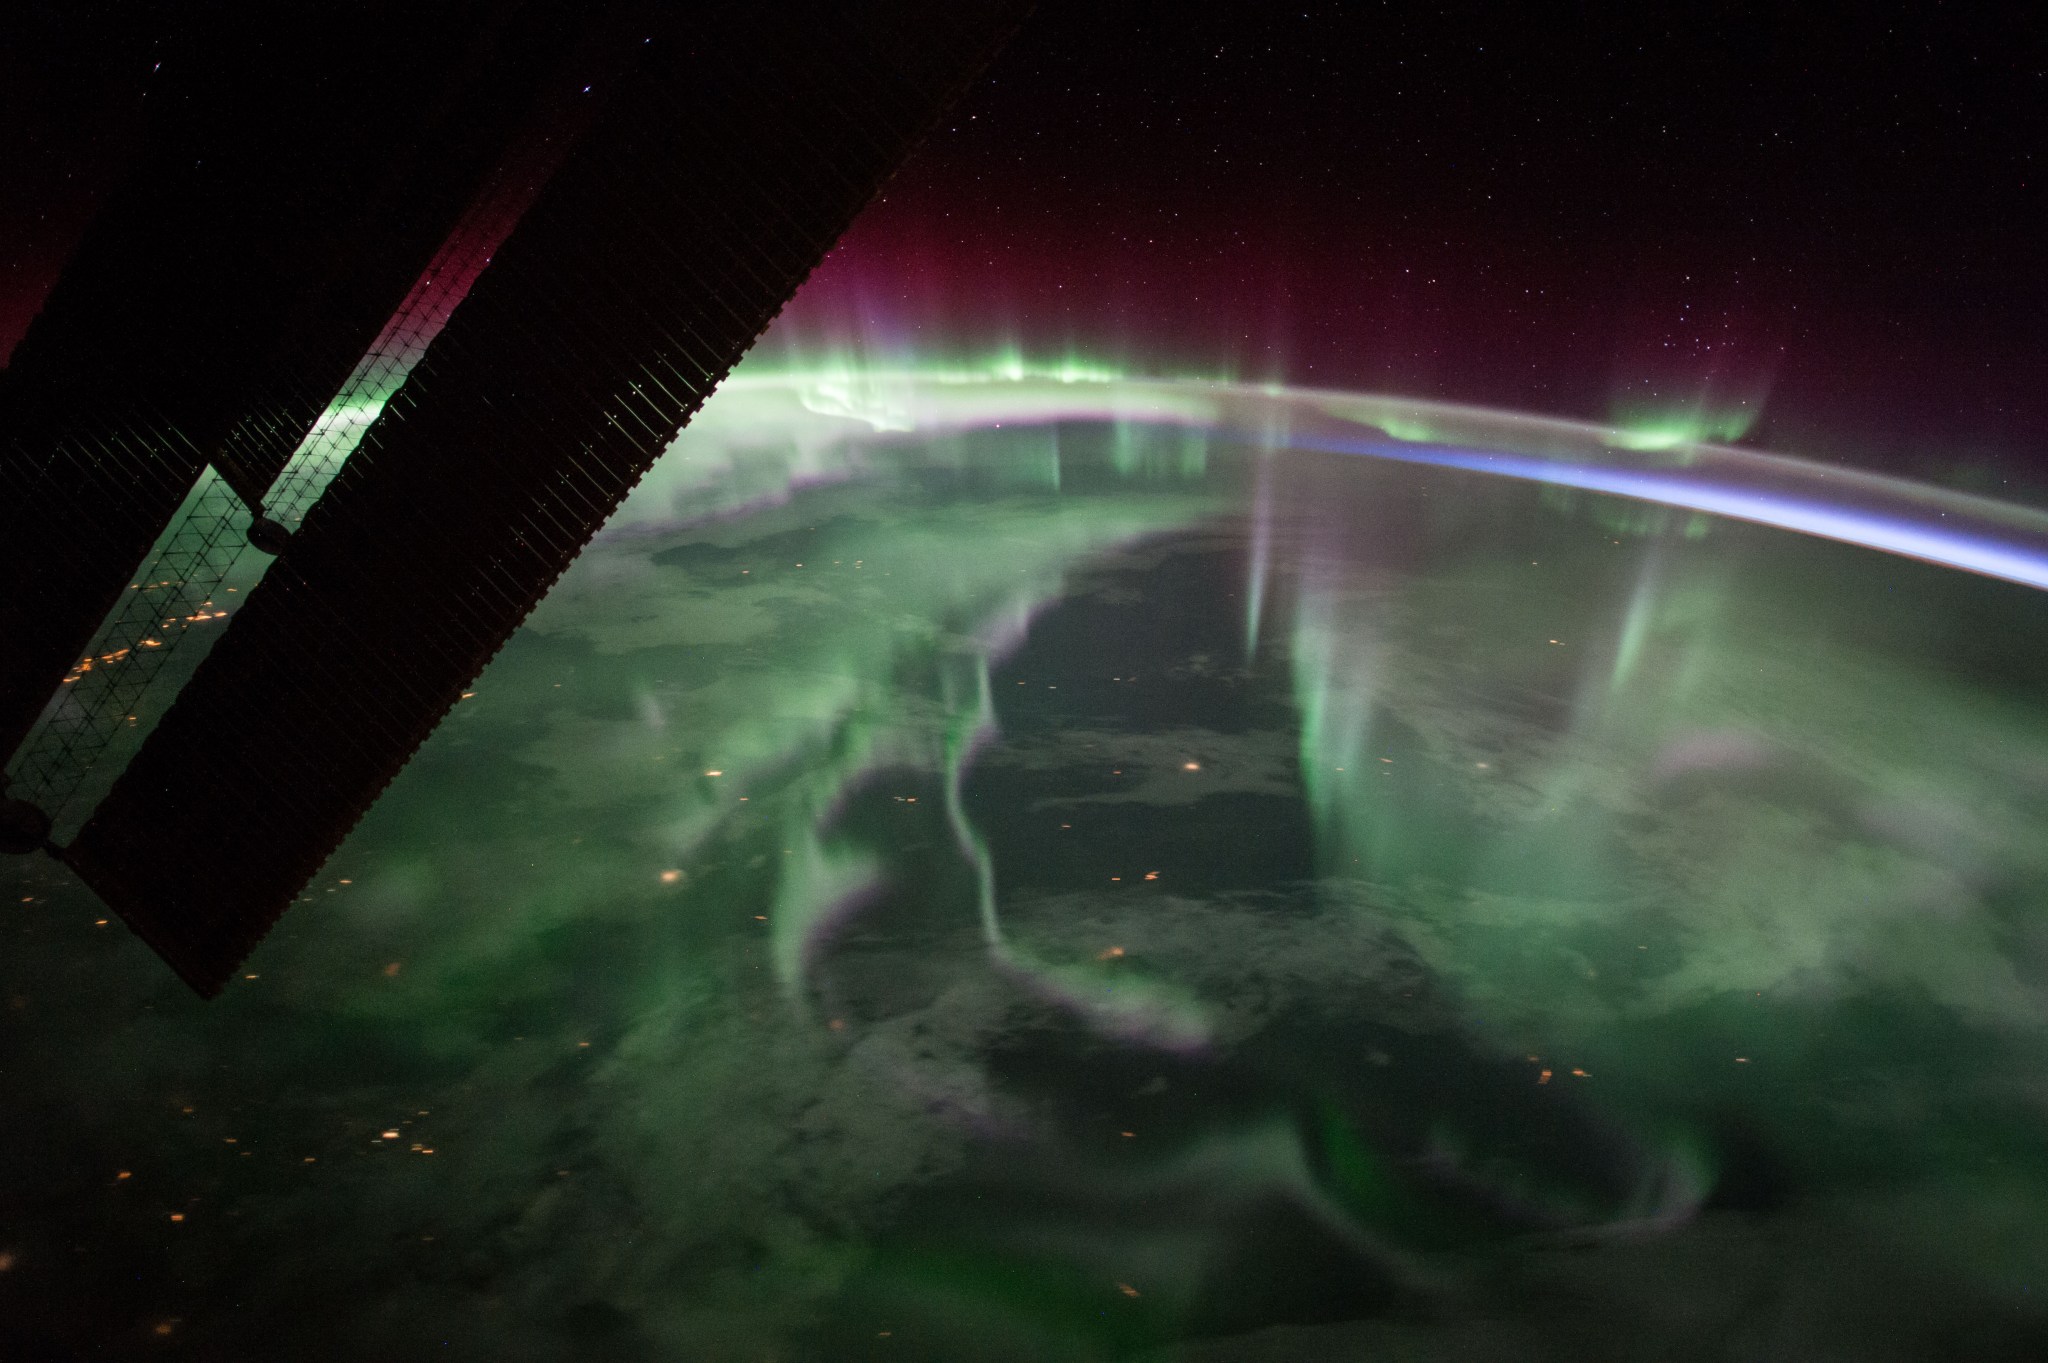 A green, fog-like haze stretches over Canada. At the edges of Earth’s atmosphere, the light takes on a purple-red color, eventually fading into the darkness of space. Some stars are faintly visible. At top left, a portion of the solar arrays of the International Space Station is backlit against the planet.